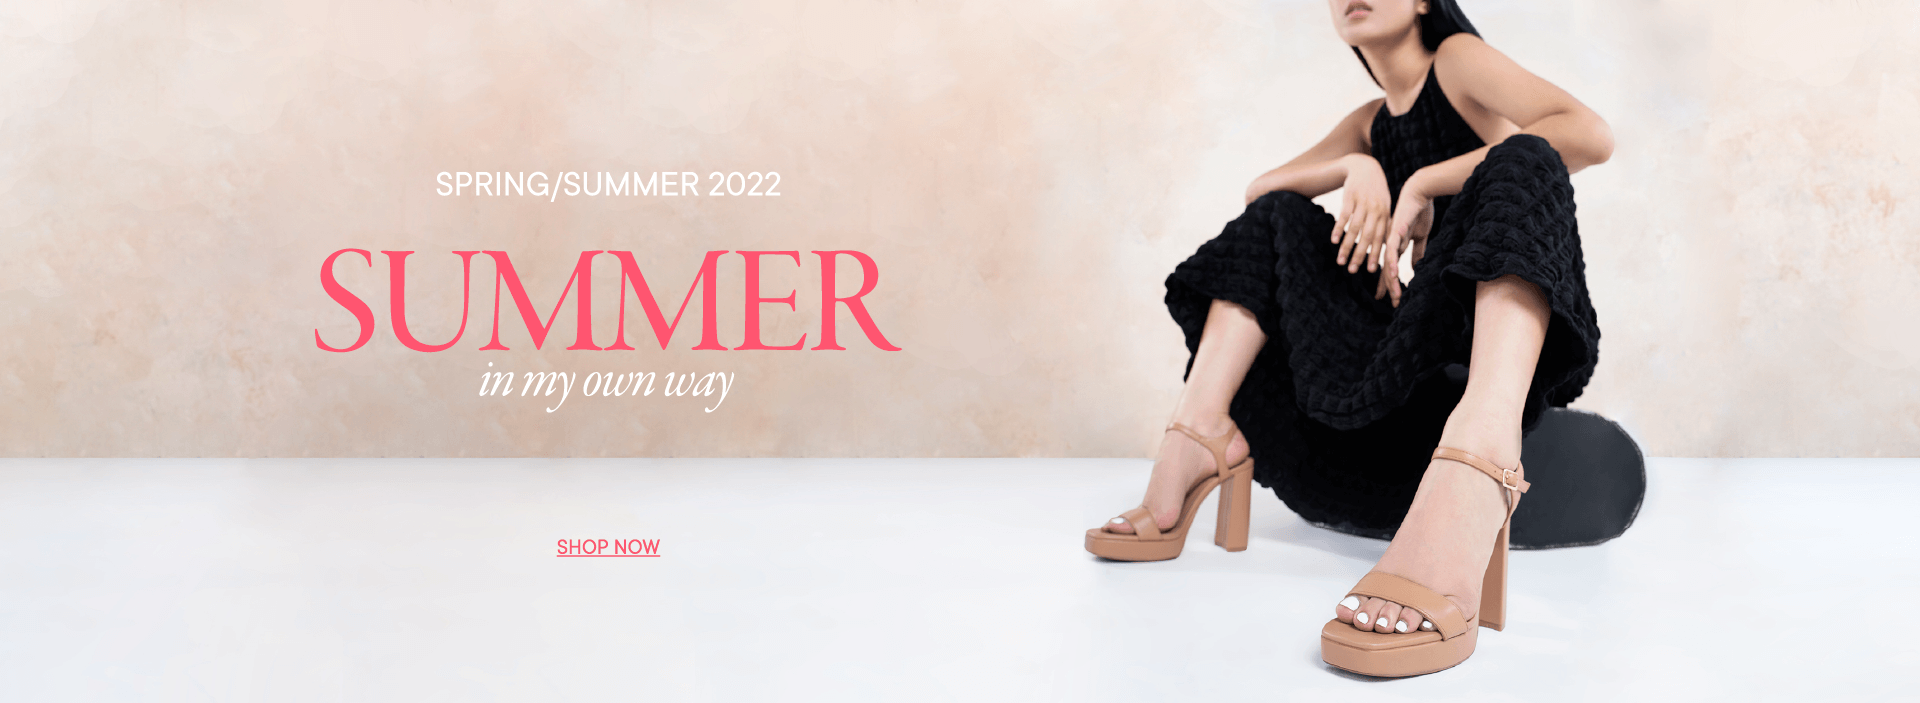 SS2022 SUMMER in my own way